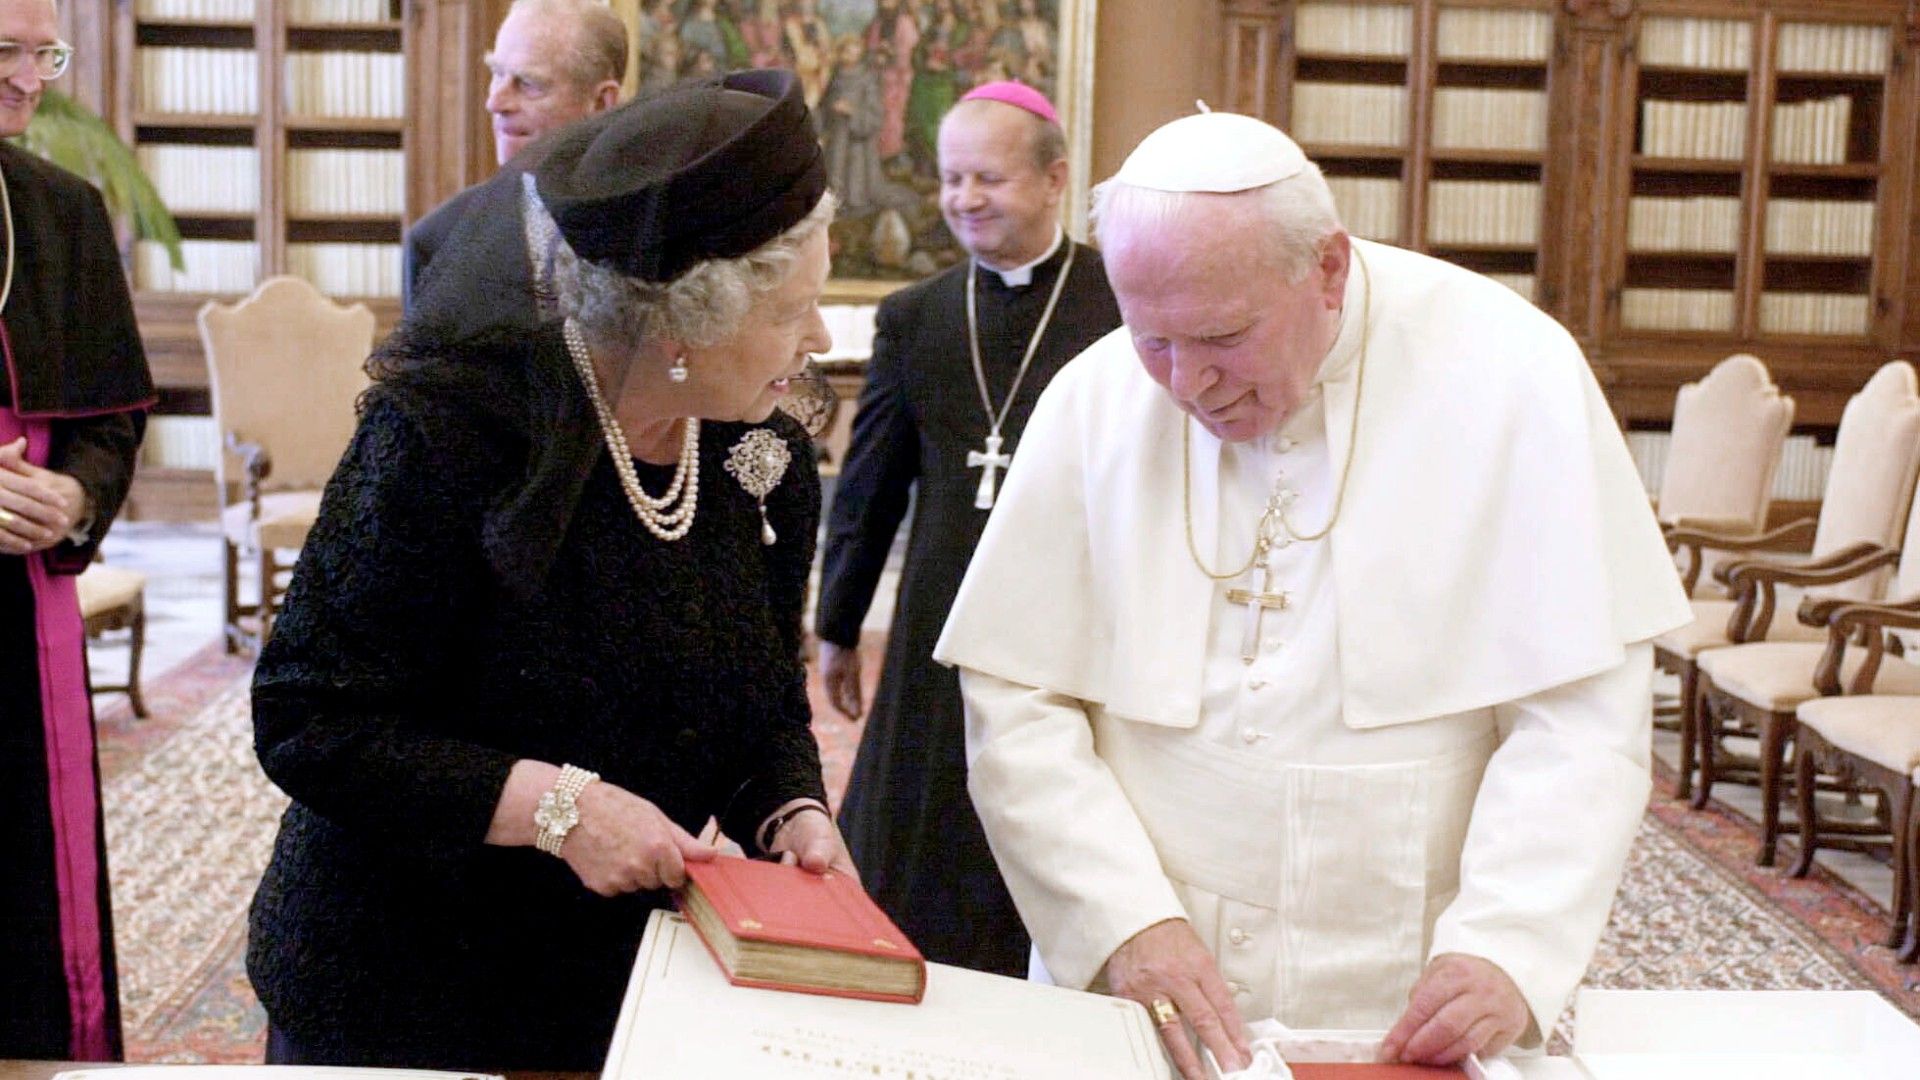 <p>                     The Queen visited a total of five different popes during various royal tours across her lifetime, but she arguably had a special connection with Pope John Paul II.                   </p>                                      <p>                     One of the most significant royal tour moments of the monarch’s life was when she visited the Vatican in Rome in October 2000. The Pope and the Queen, two of the biggest figureheads of the Catholic religion, shared a private conversation before exchanging gifts in Pope John Paul II's private office in the Vatican City. Before this, she had spent time at the Vatican with Pope John Paul II back in 1980, when she also delivered a speech in front of him and members of the clergy within the room.                   </p>